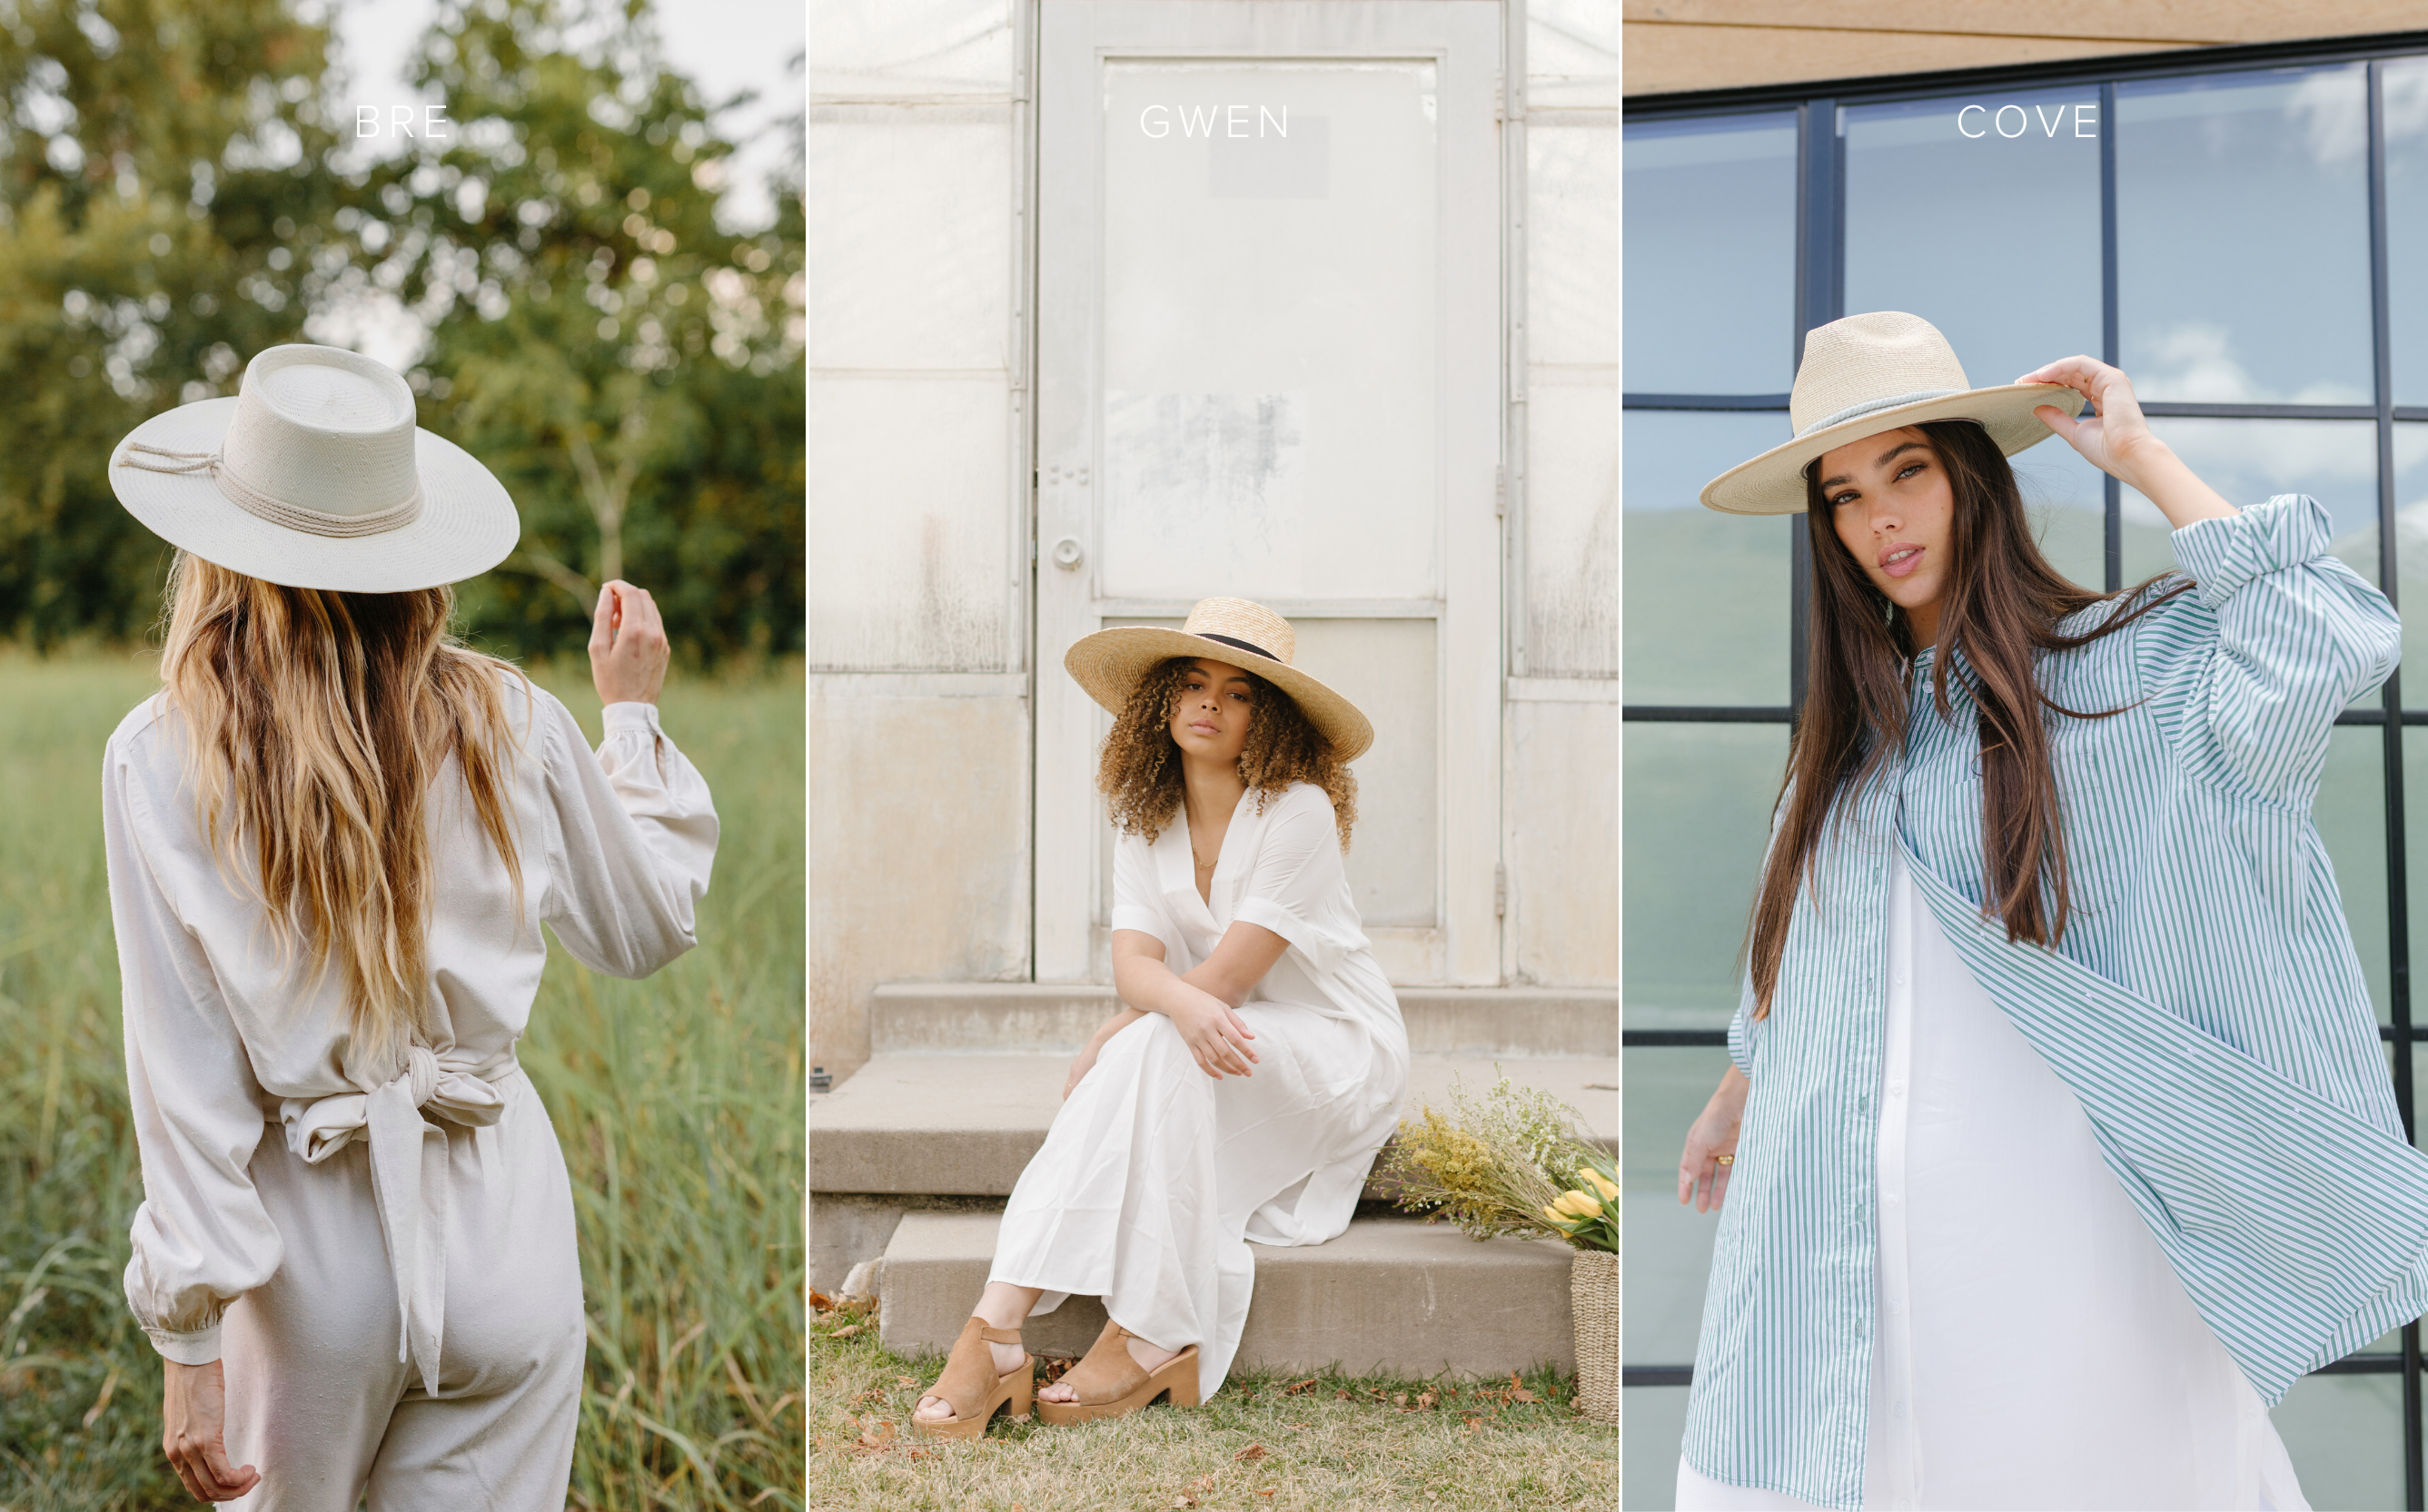 Three Images of Women in Straw Hats